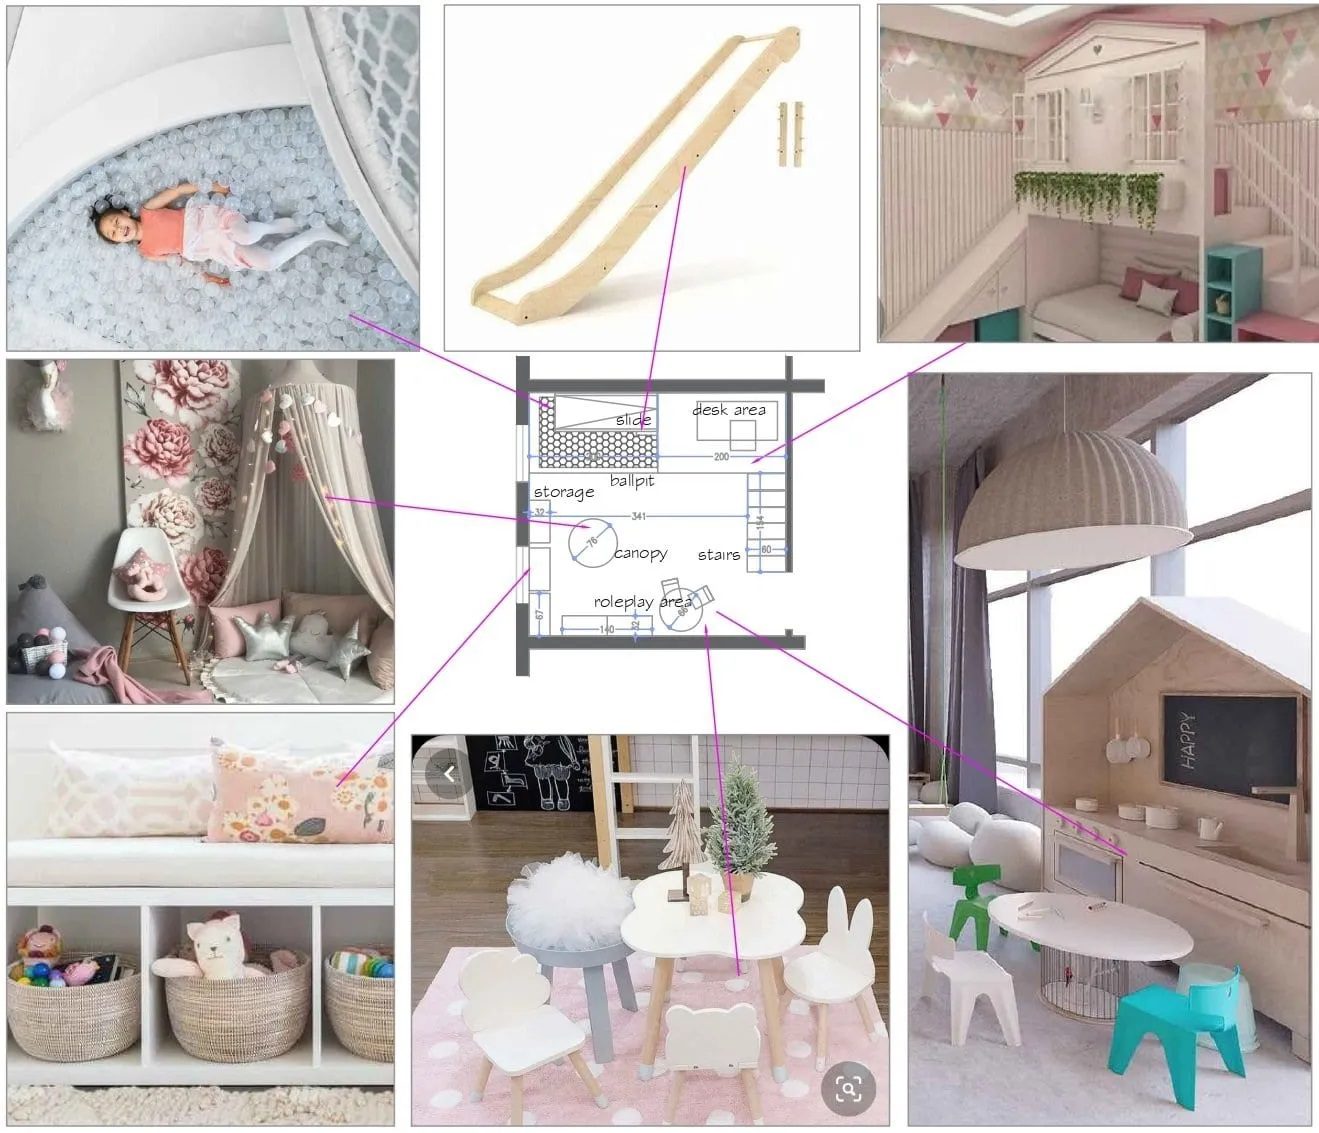 Style ideas for interior design at Moon Kids Home